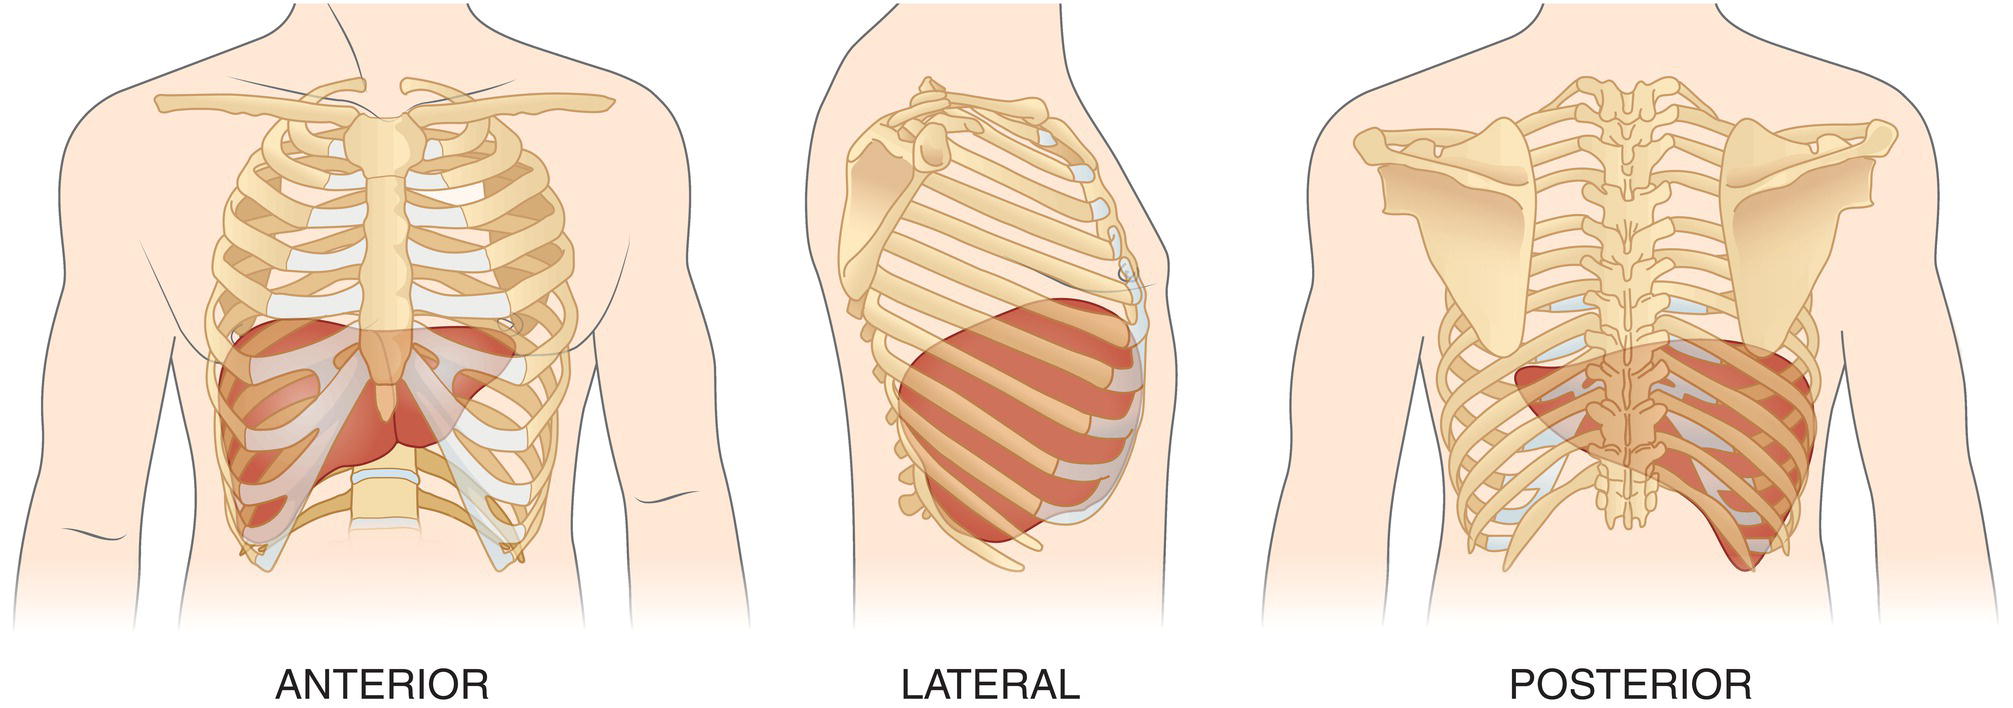 Three schematic diagrams show the position of the liver in the human body from three different angles. The liver is located below the diaphragm. a. Anterior view. b. Lateral view. c. Posterior view.